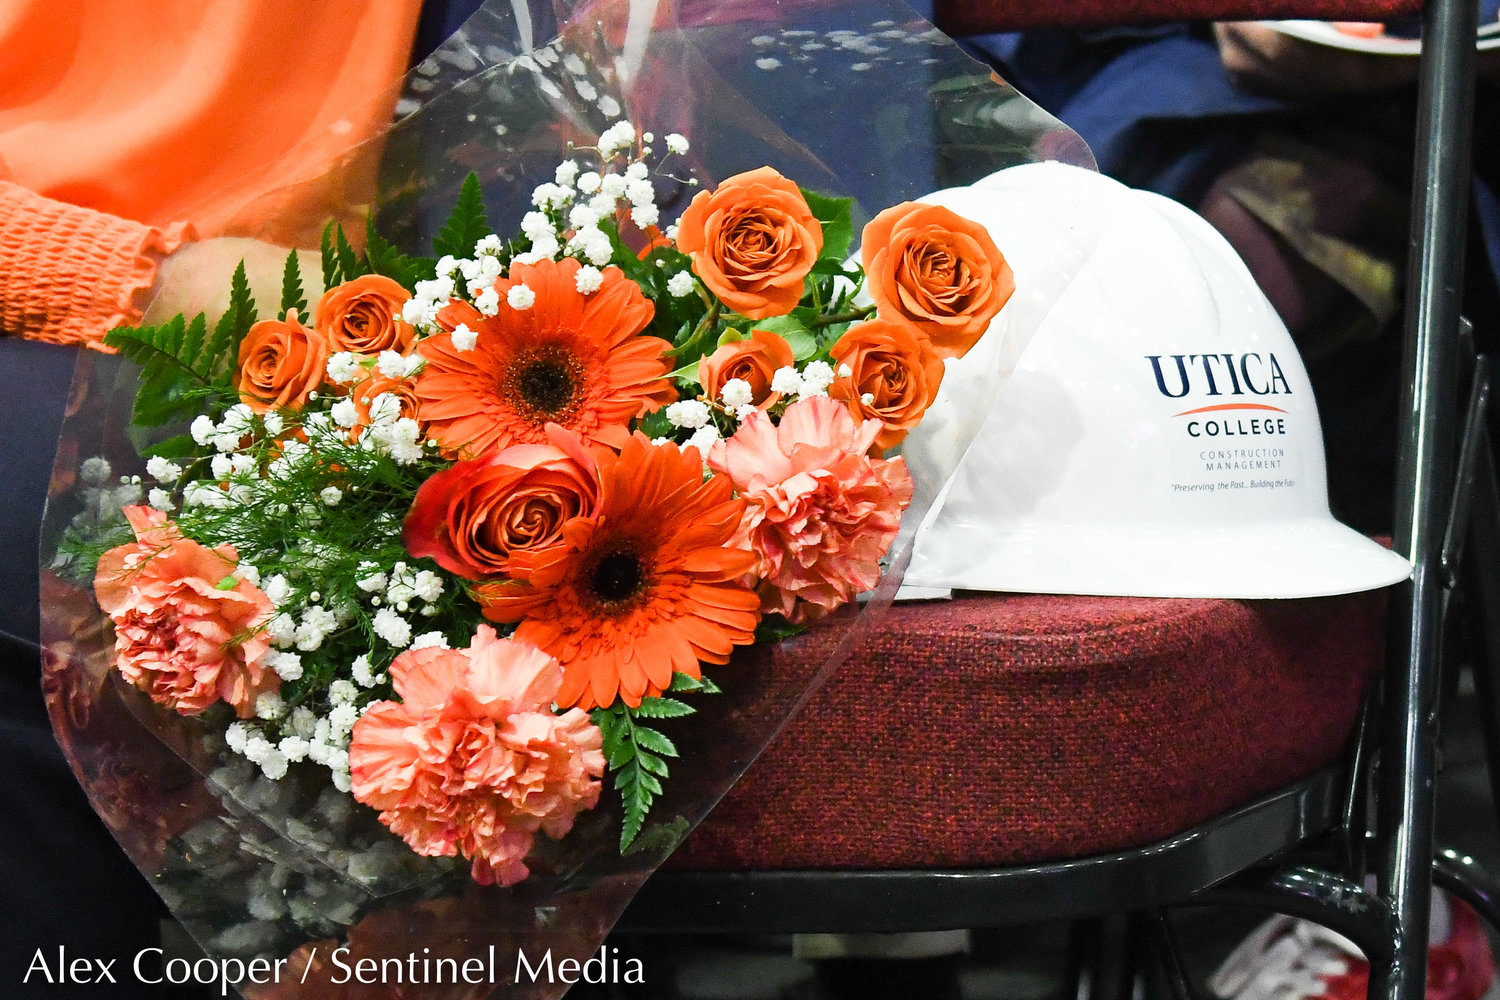 John Paul Ramel, a construction management major, passed away before graduation but was still honored during Utica University's Commencement Ceremony on Thursday at the Adirondack Bank Center at the Utica Memorial Auditorium.